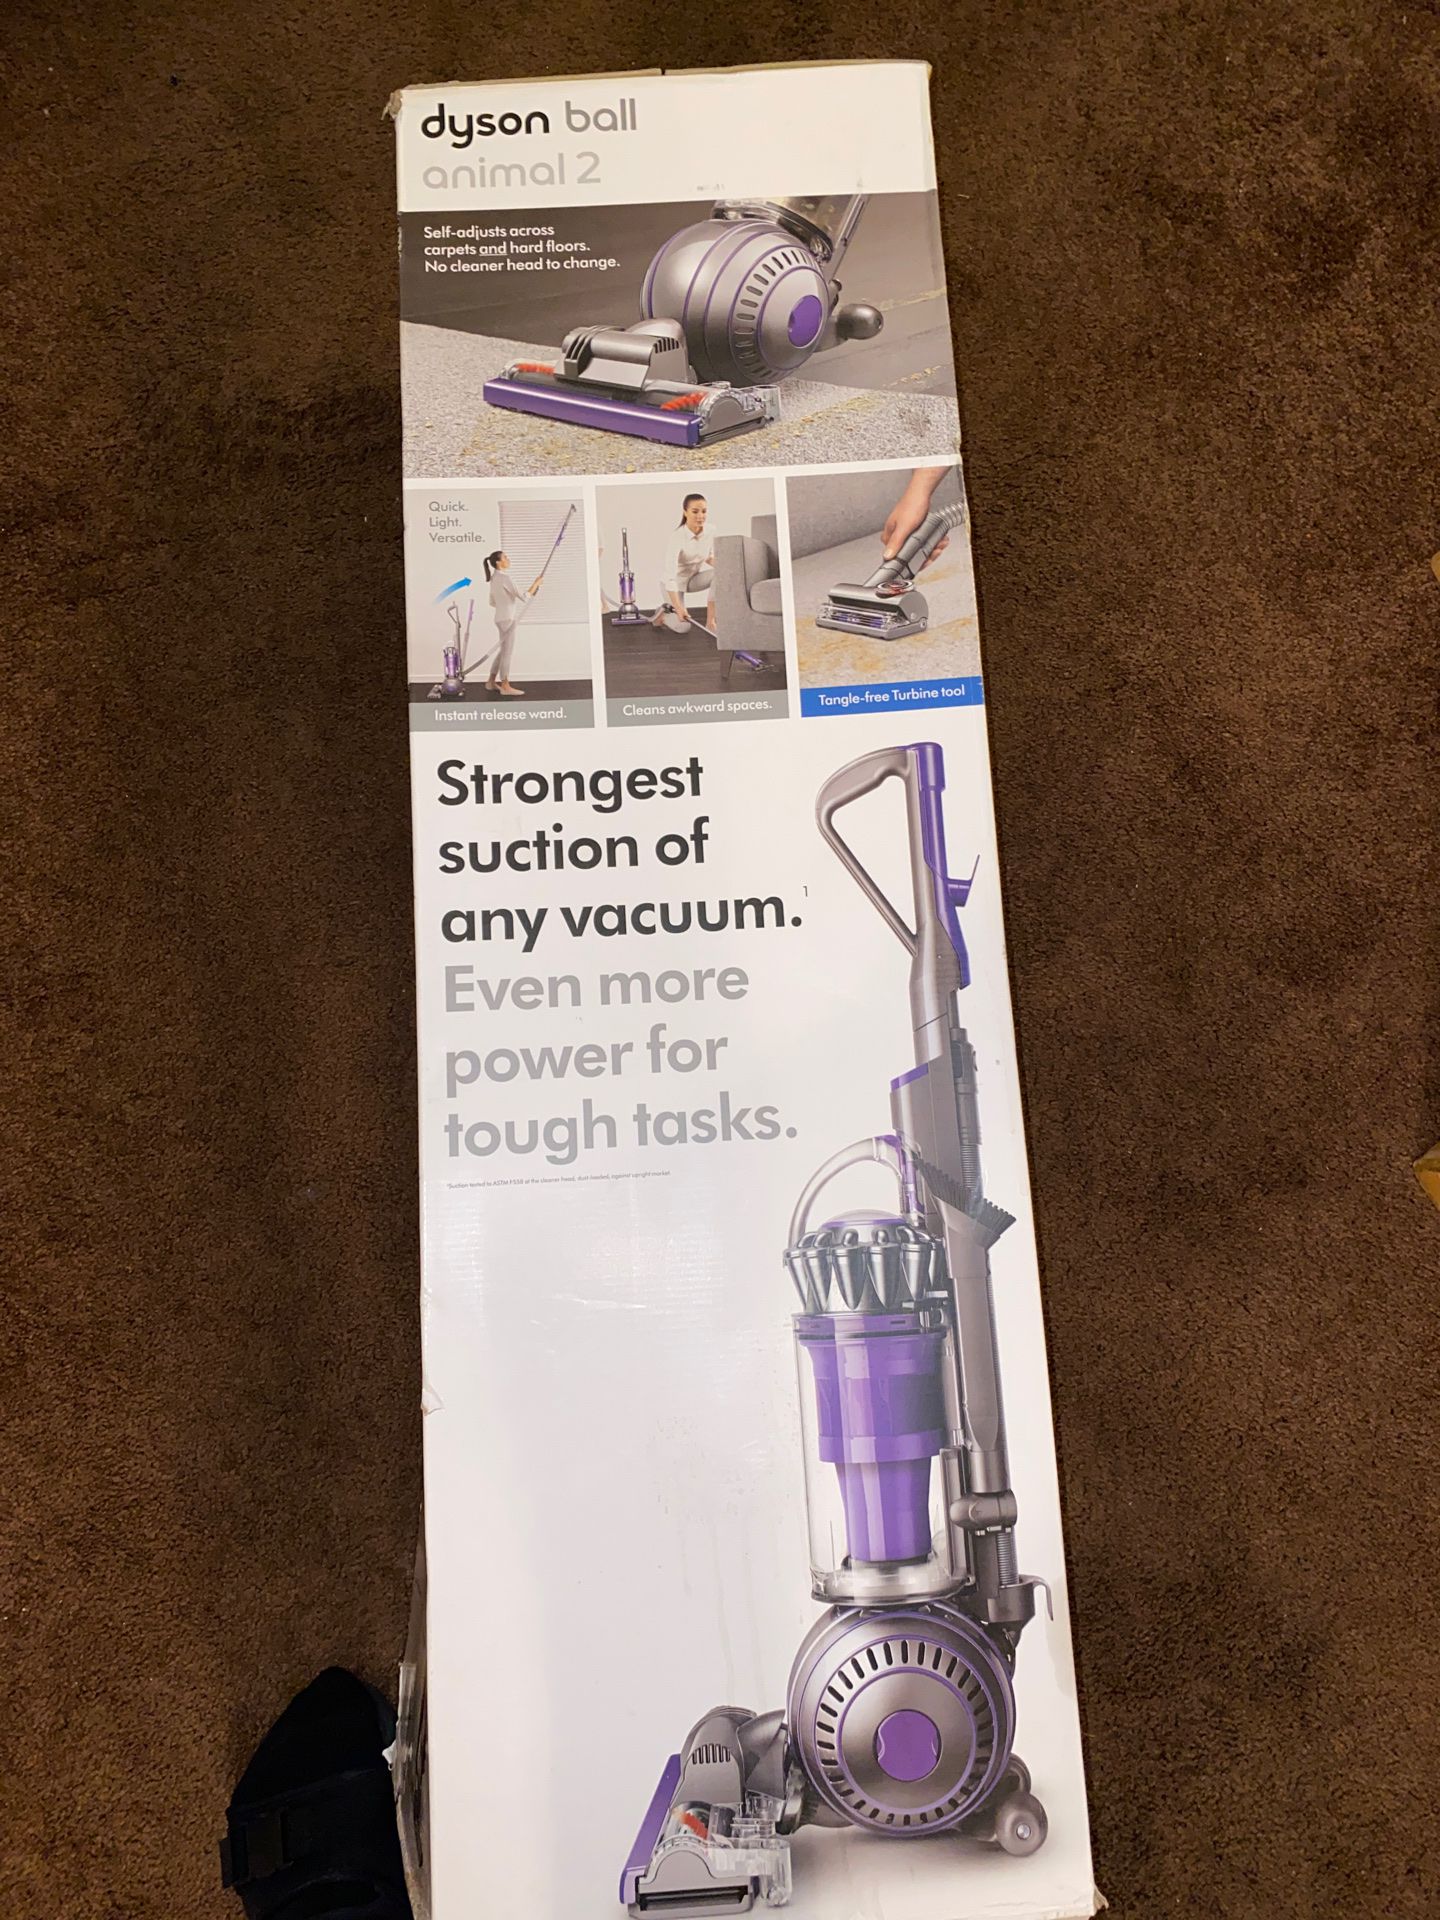 “DYSON BALL” vacuum cleaner